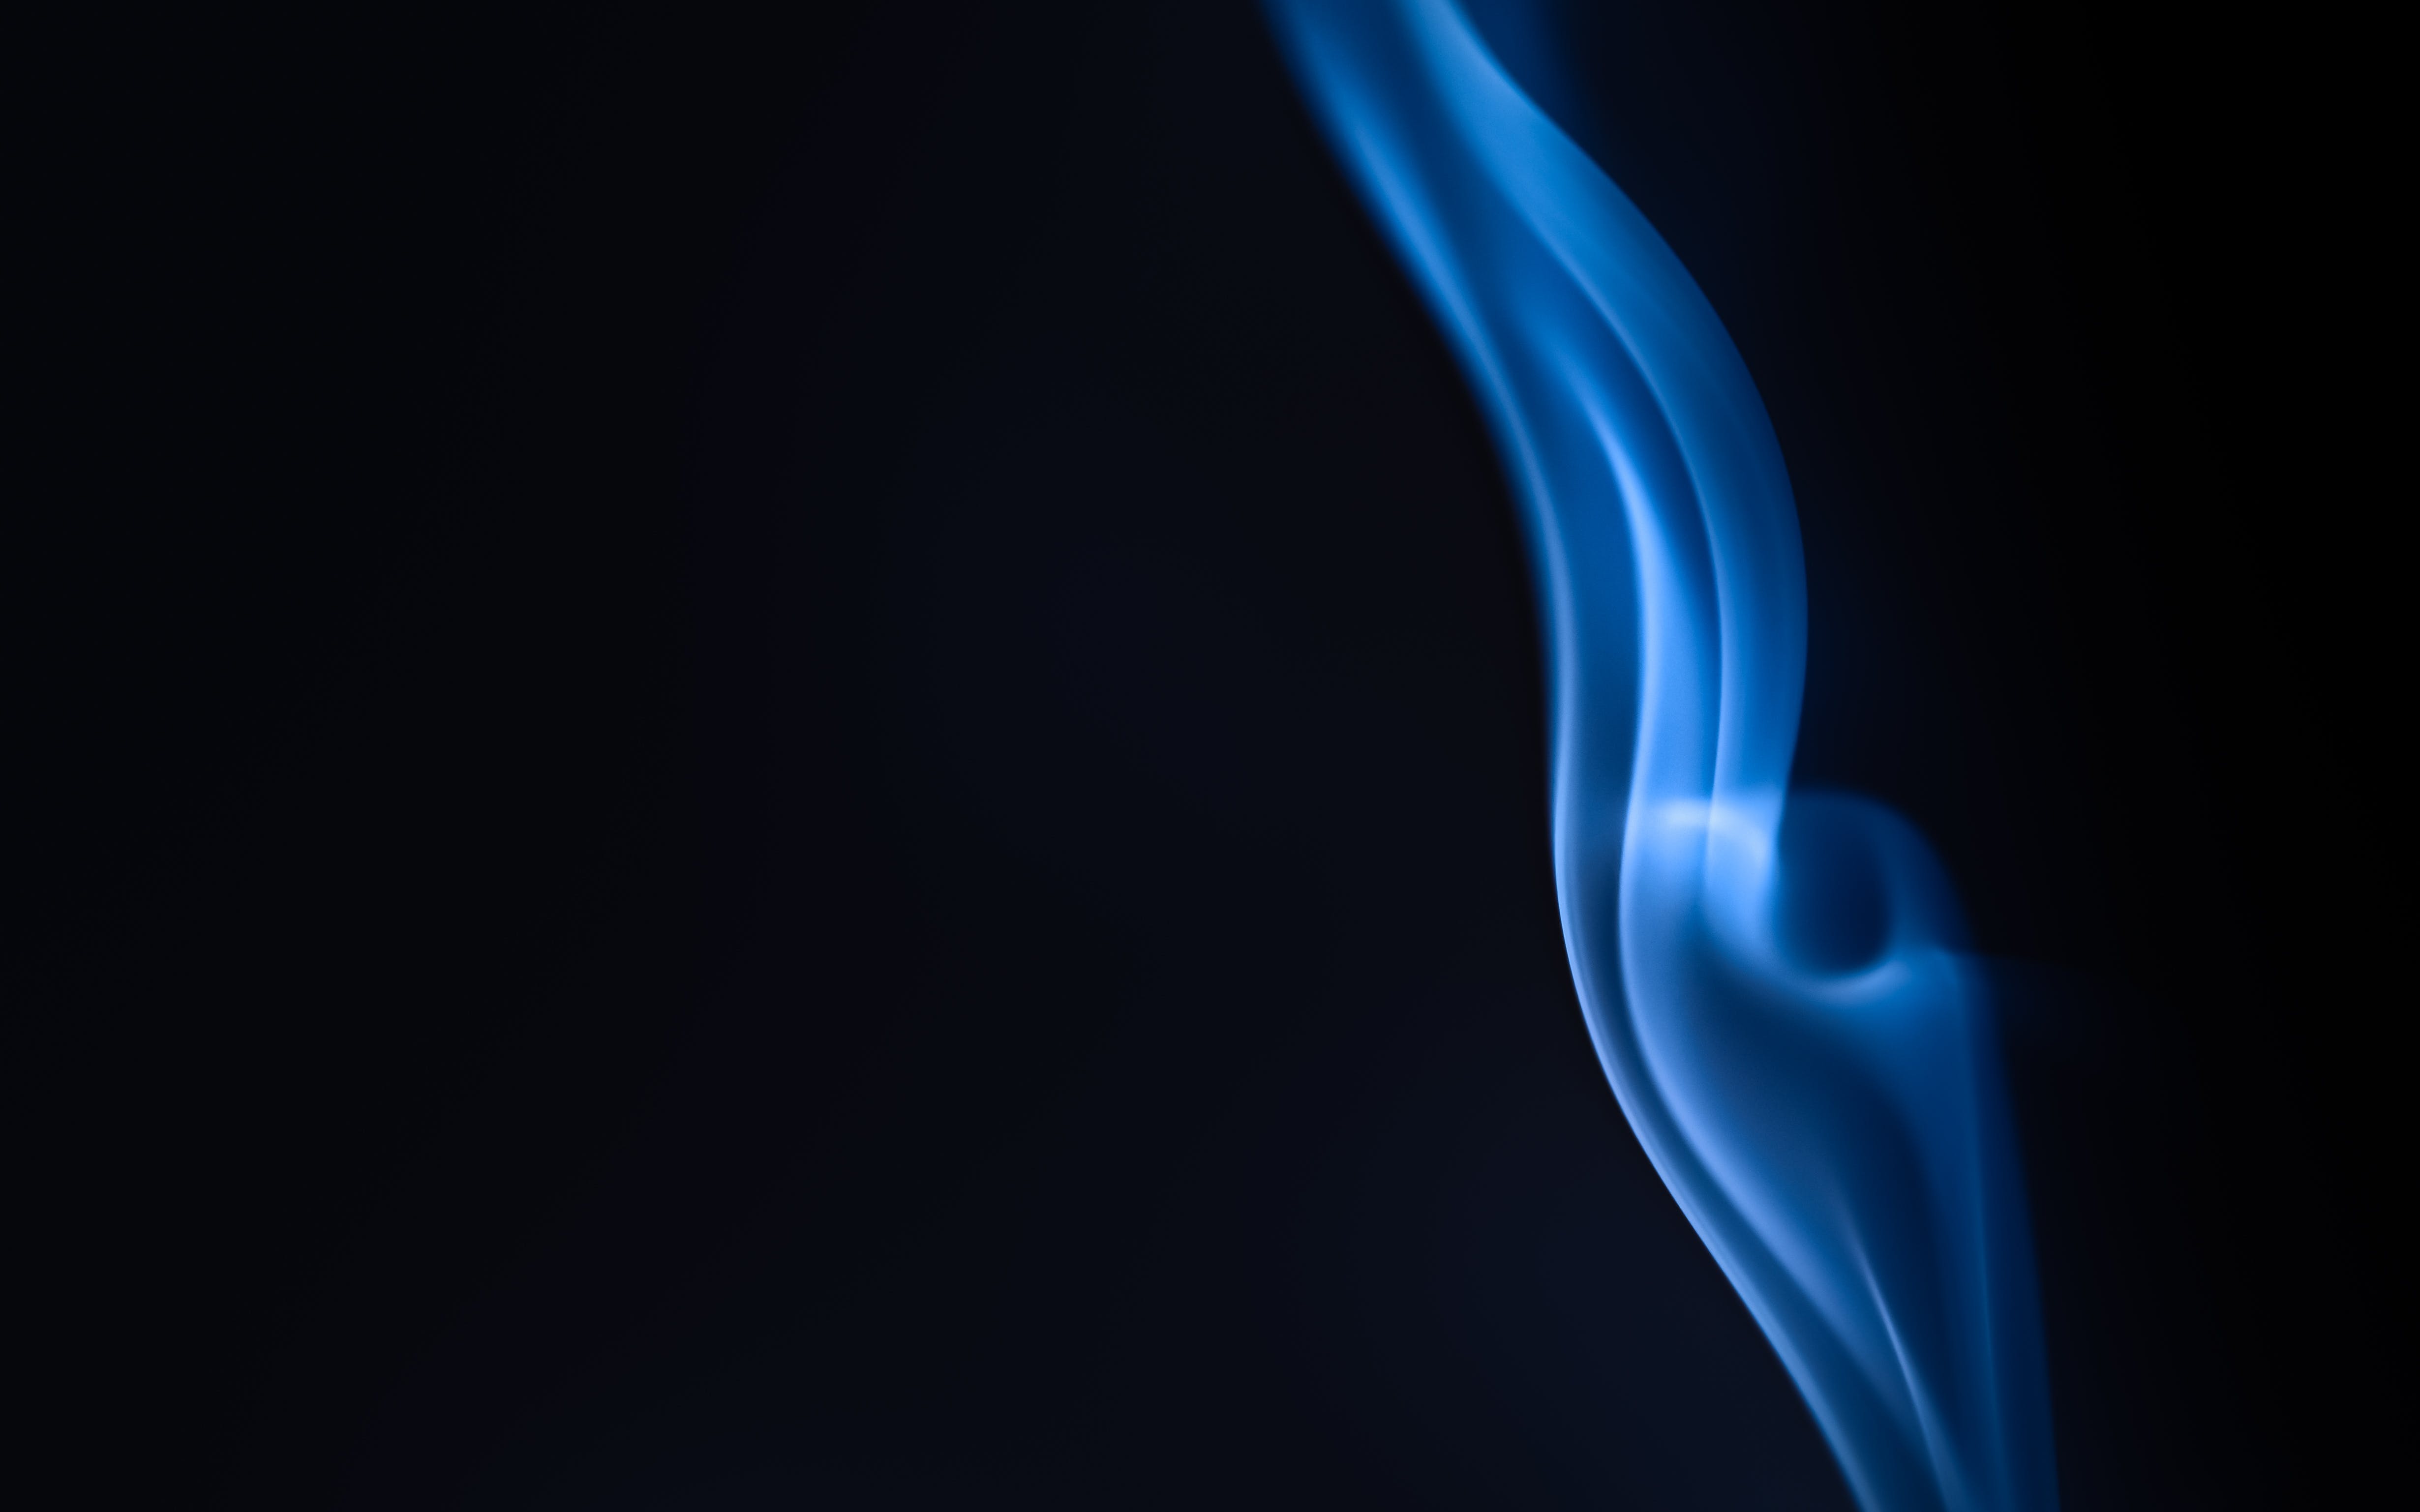 Blue Flame Background Images HD Pictures and Wallpaper For Free Download   Pngtree